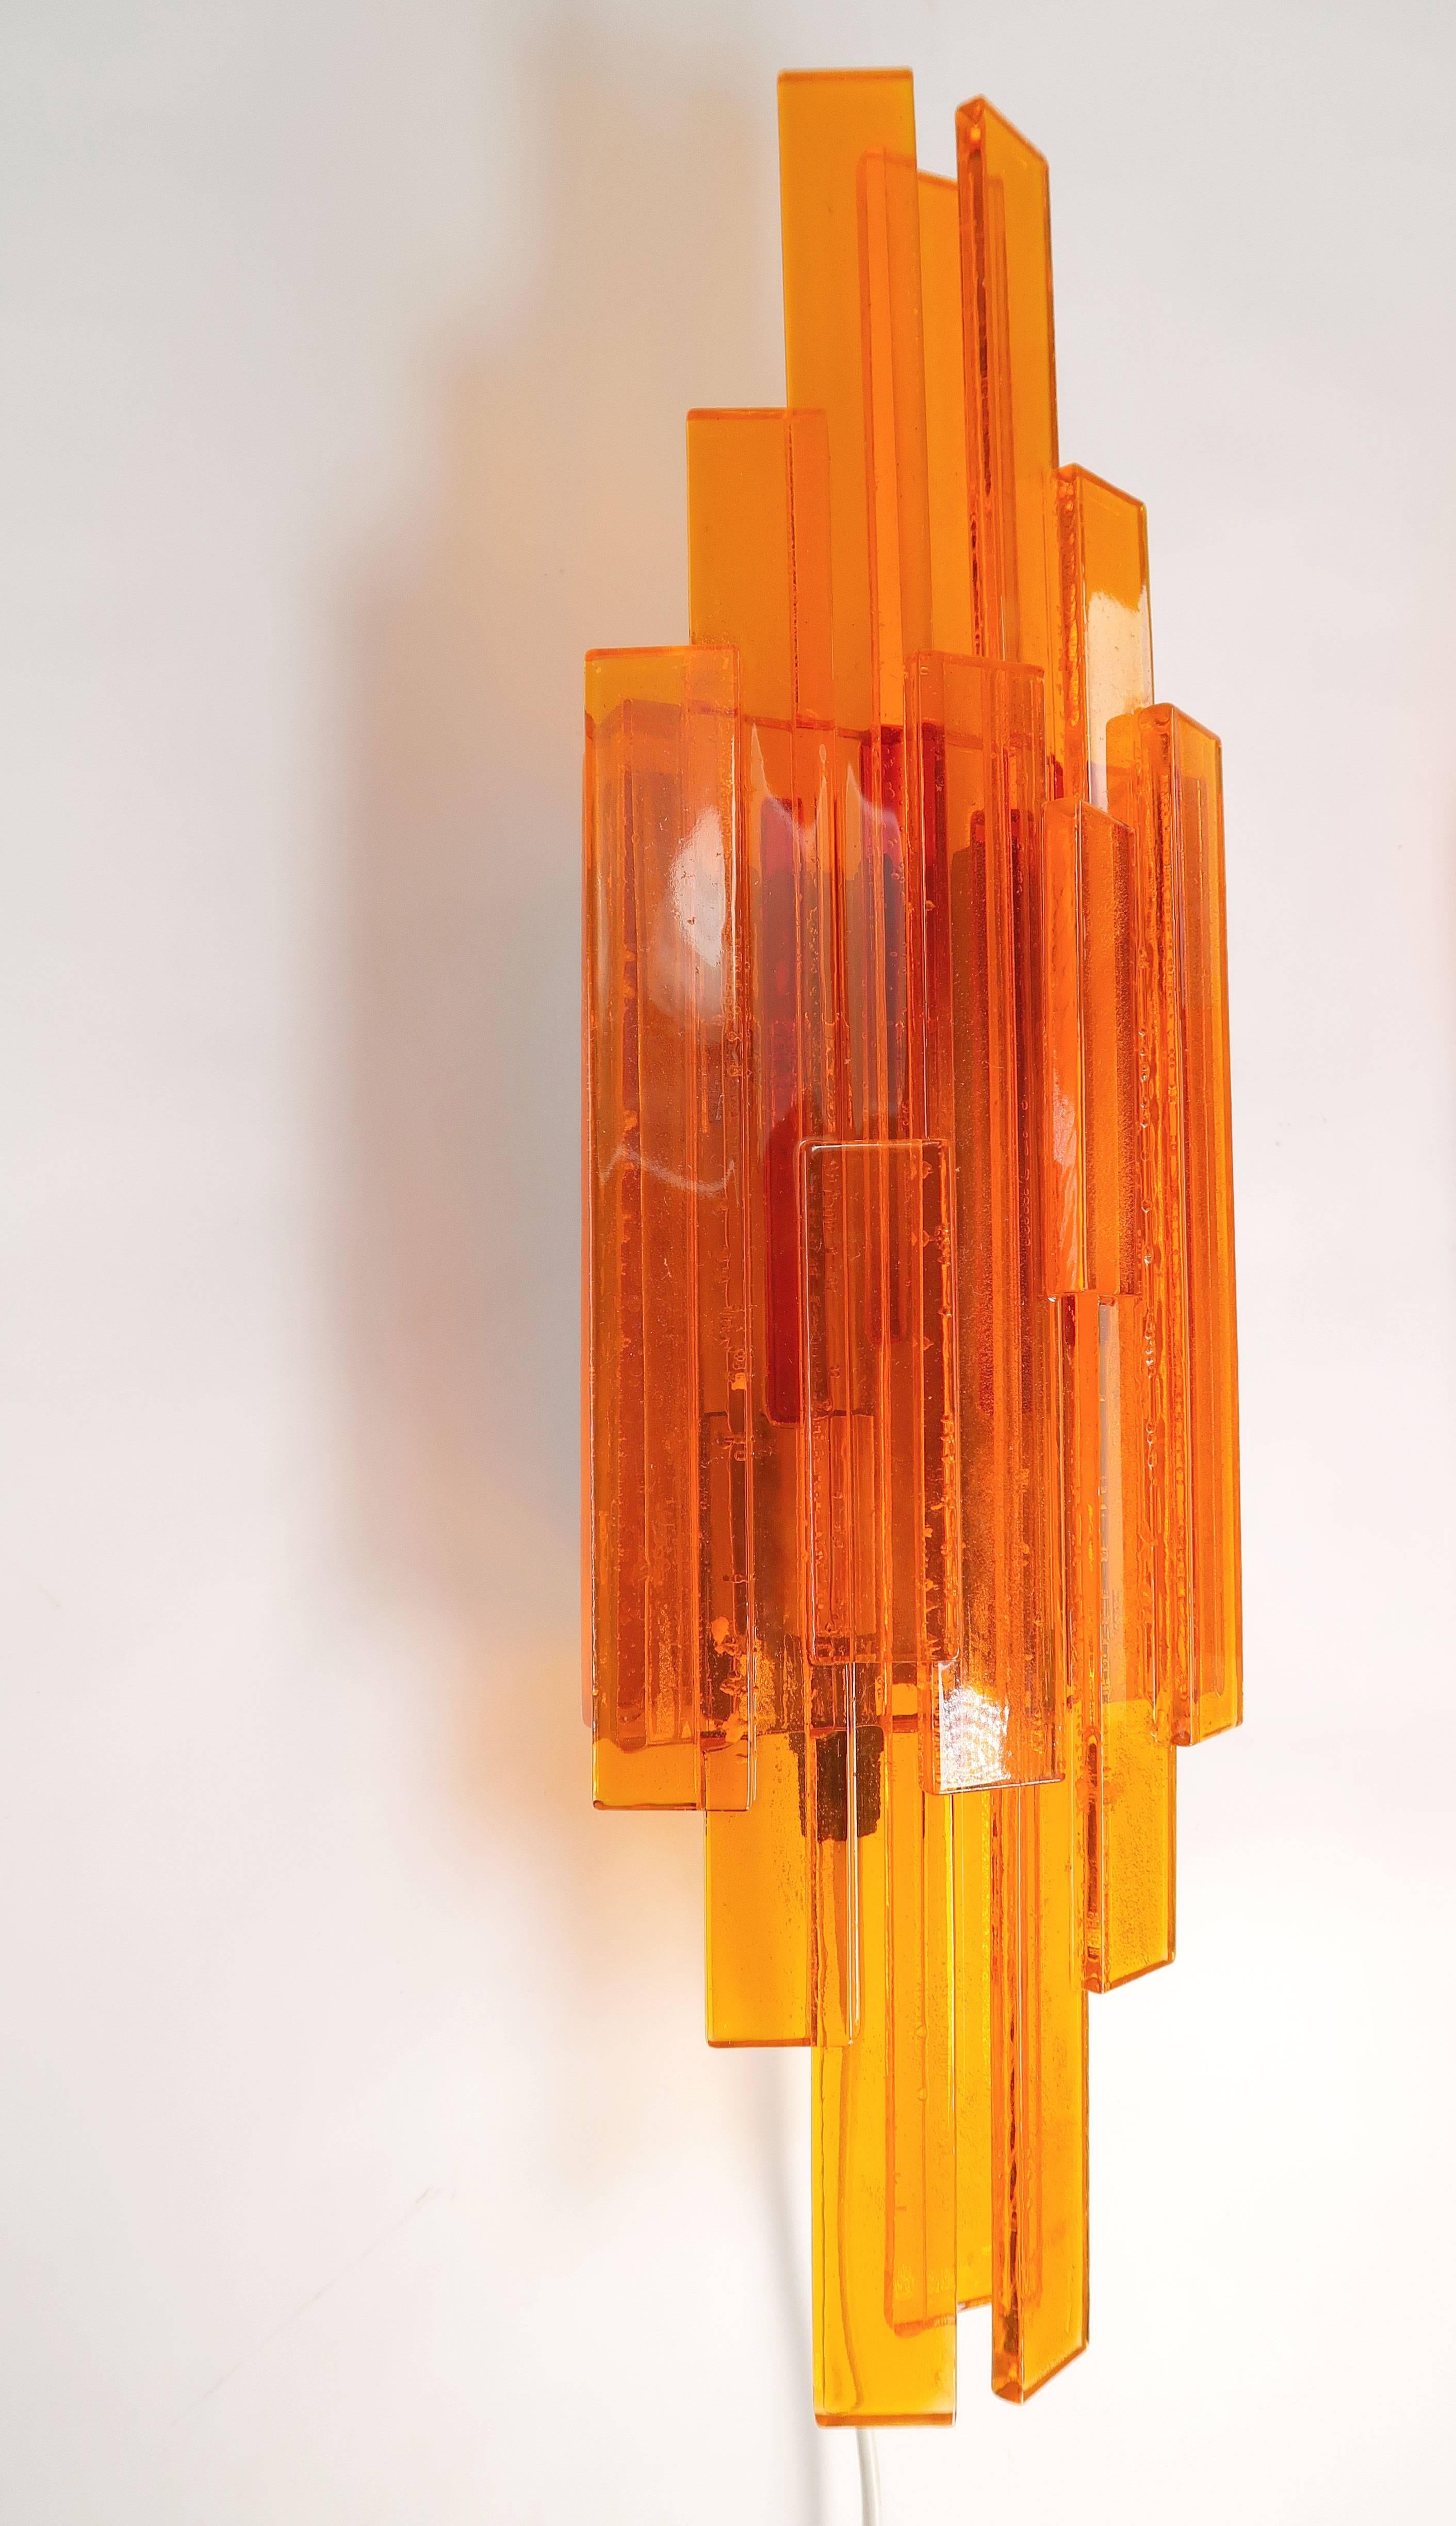 Late 20th Century Trio of Danish Space Age Orange Acrylic Wall Lights by Claus Bolby, 1975